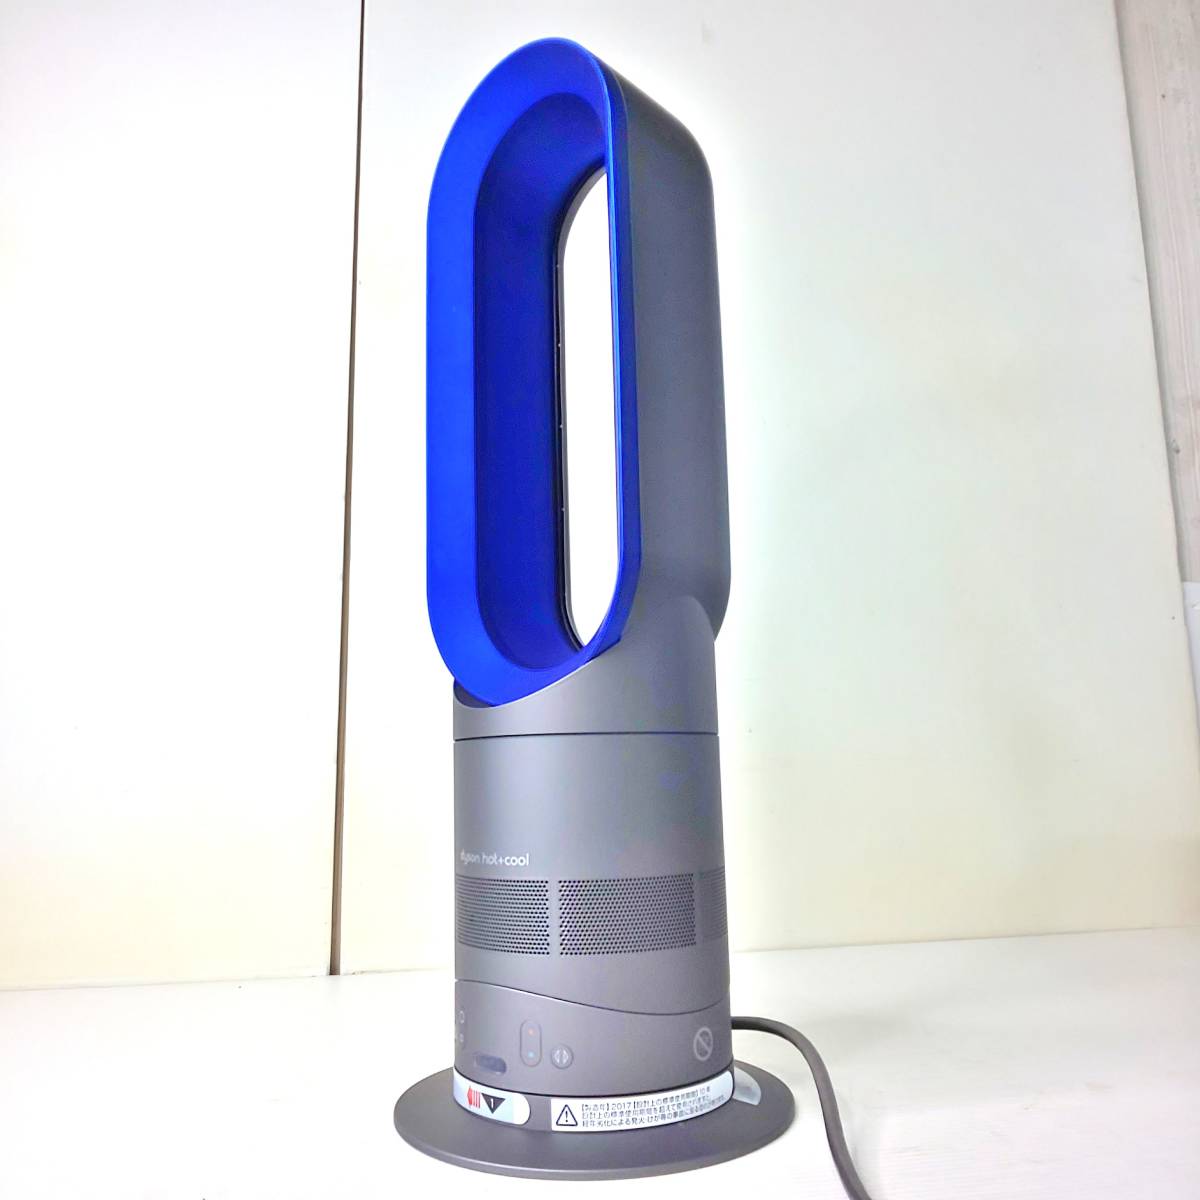  Dyson Dyson AM05 Hot + Cool Fan Heater cold manner temperature manner . remote control attaching operation goods box, manual attaching 